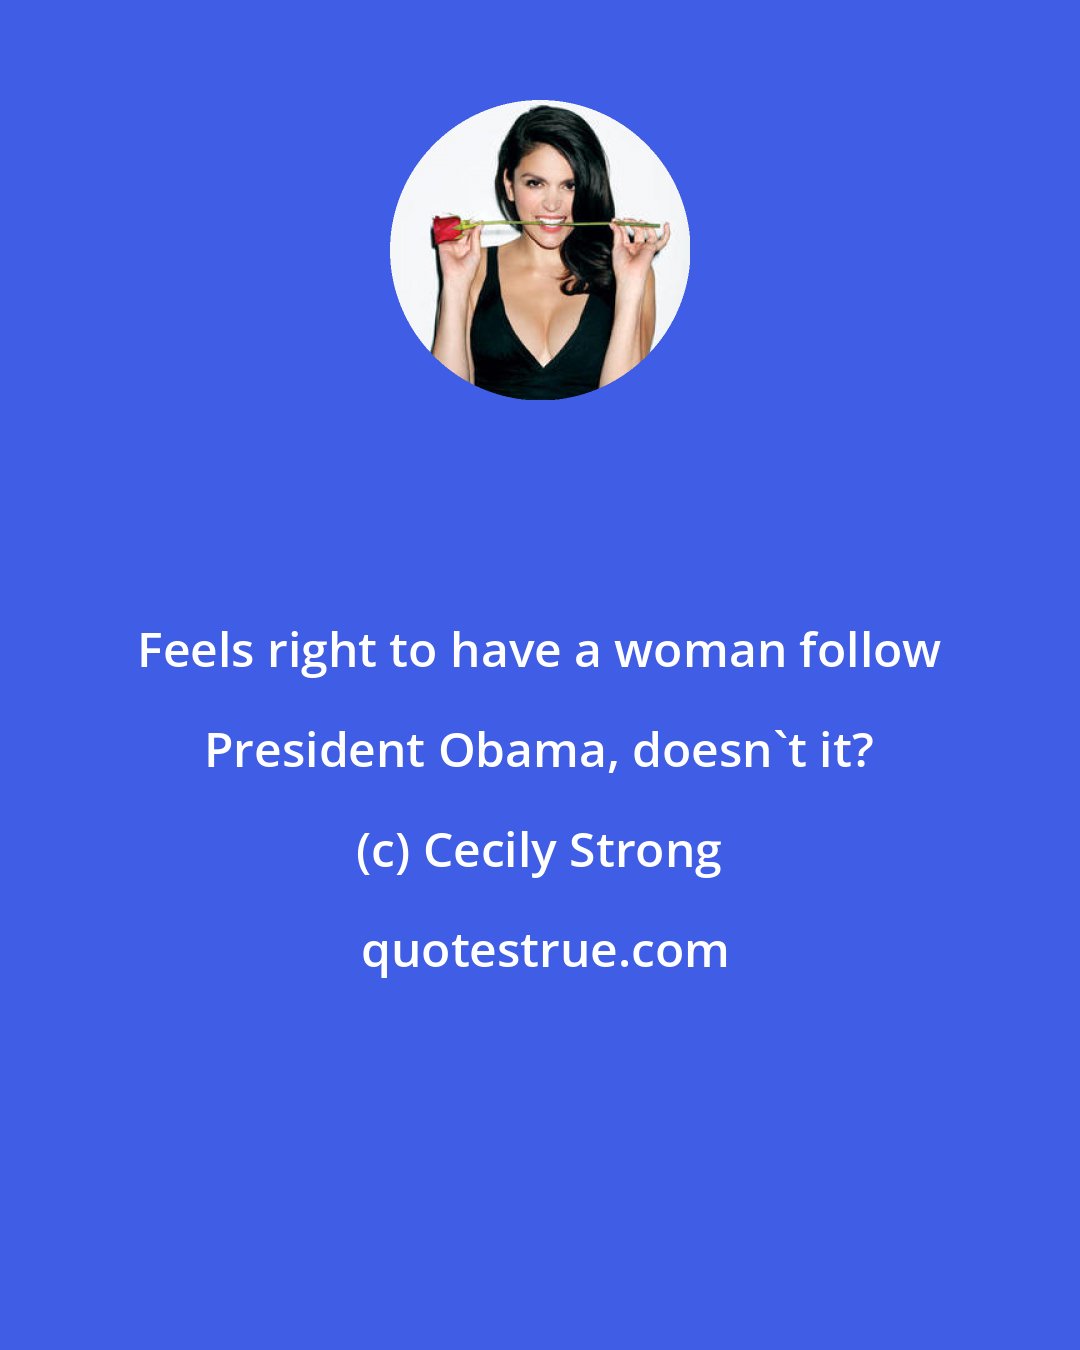 Cecily Strong: Feels right to have a woman follow President Obama, doesn't it?